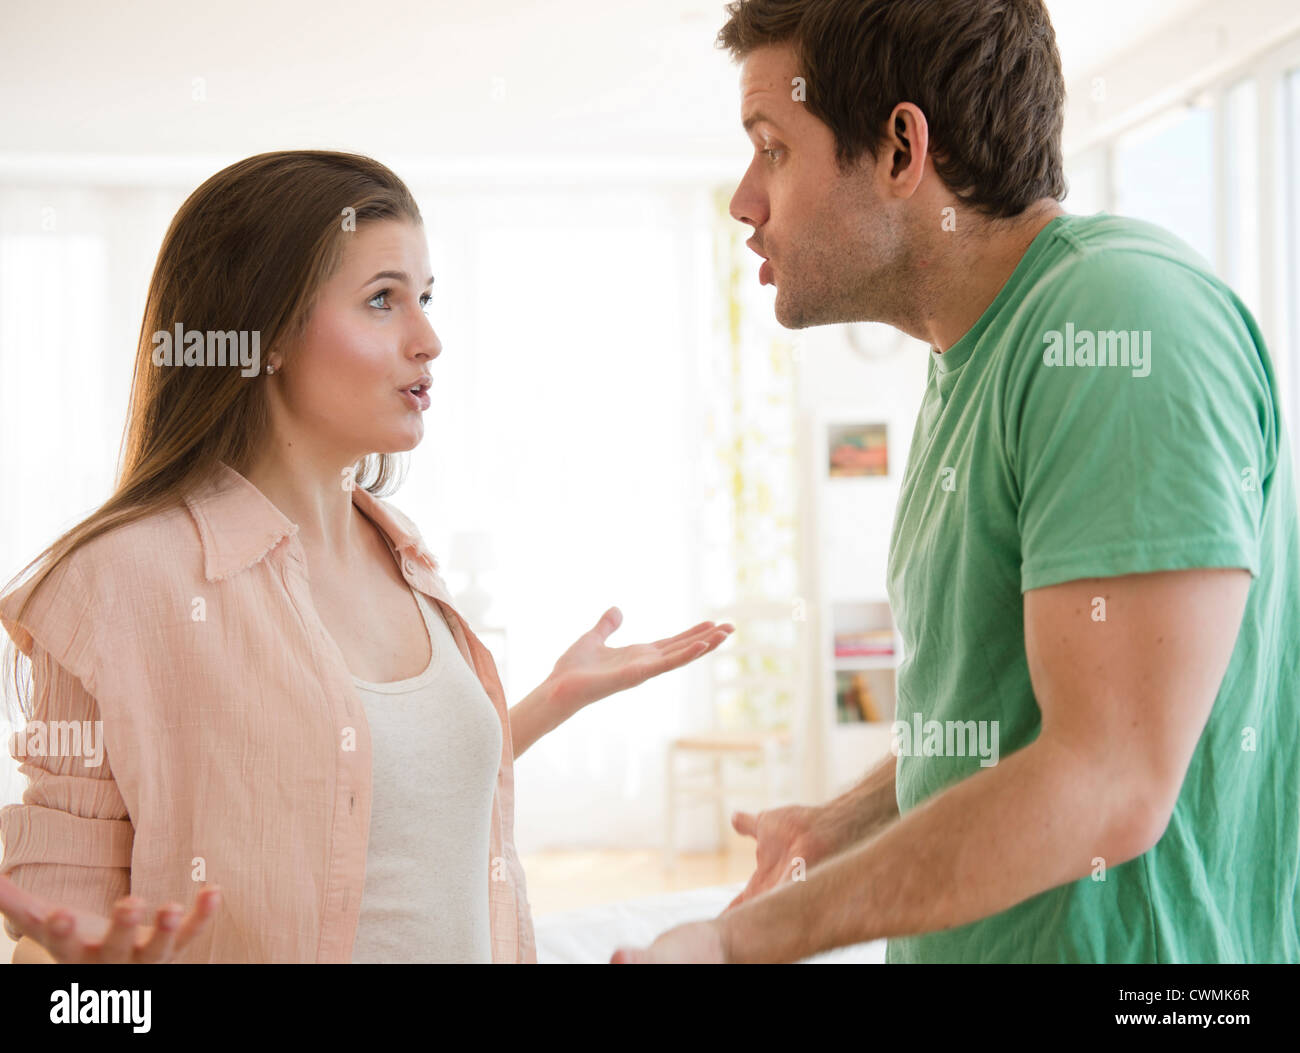 USA, New Jersey, Jersey City, Young couple arguing Stock Photo